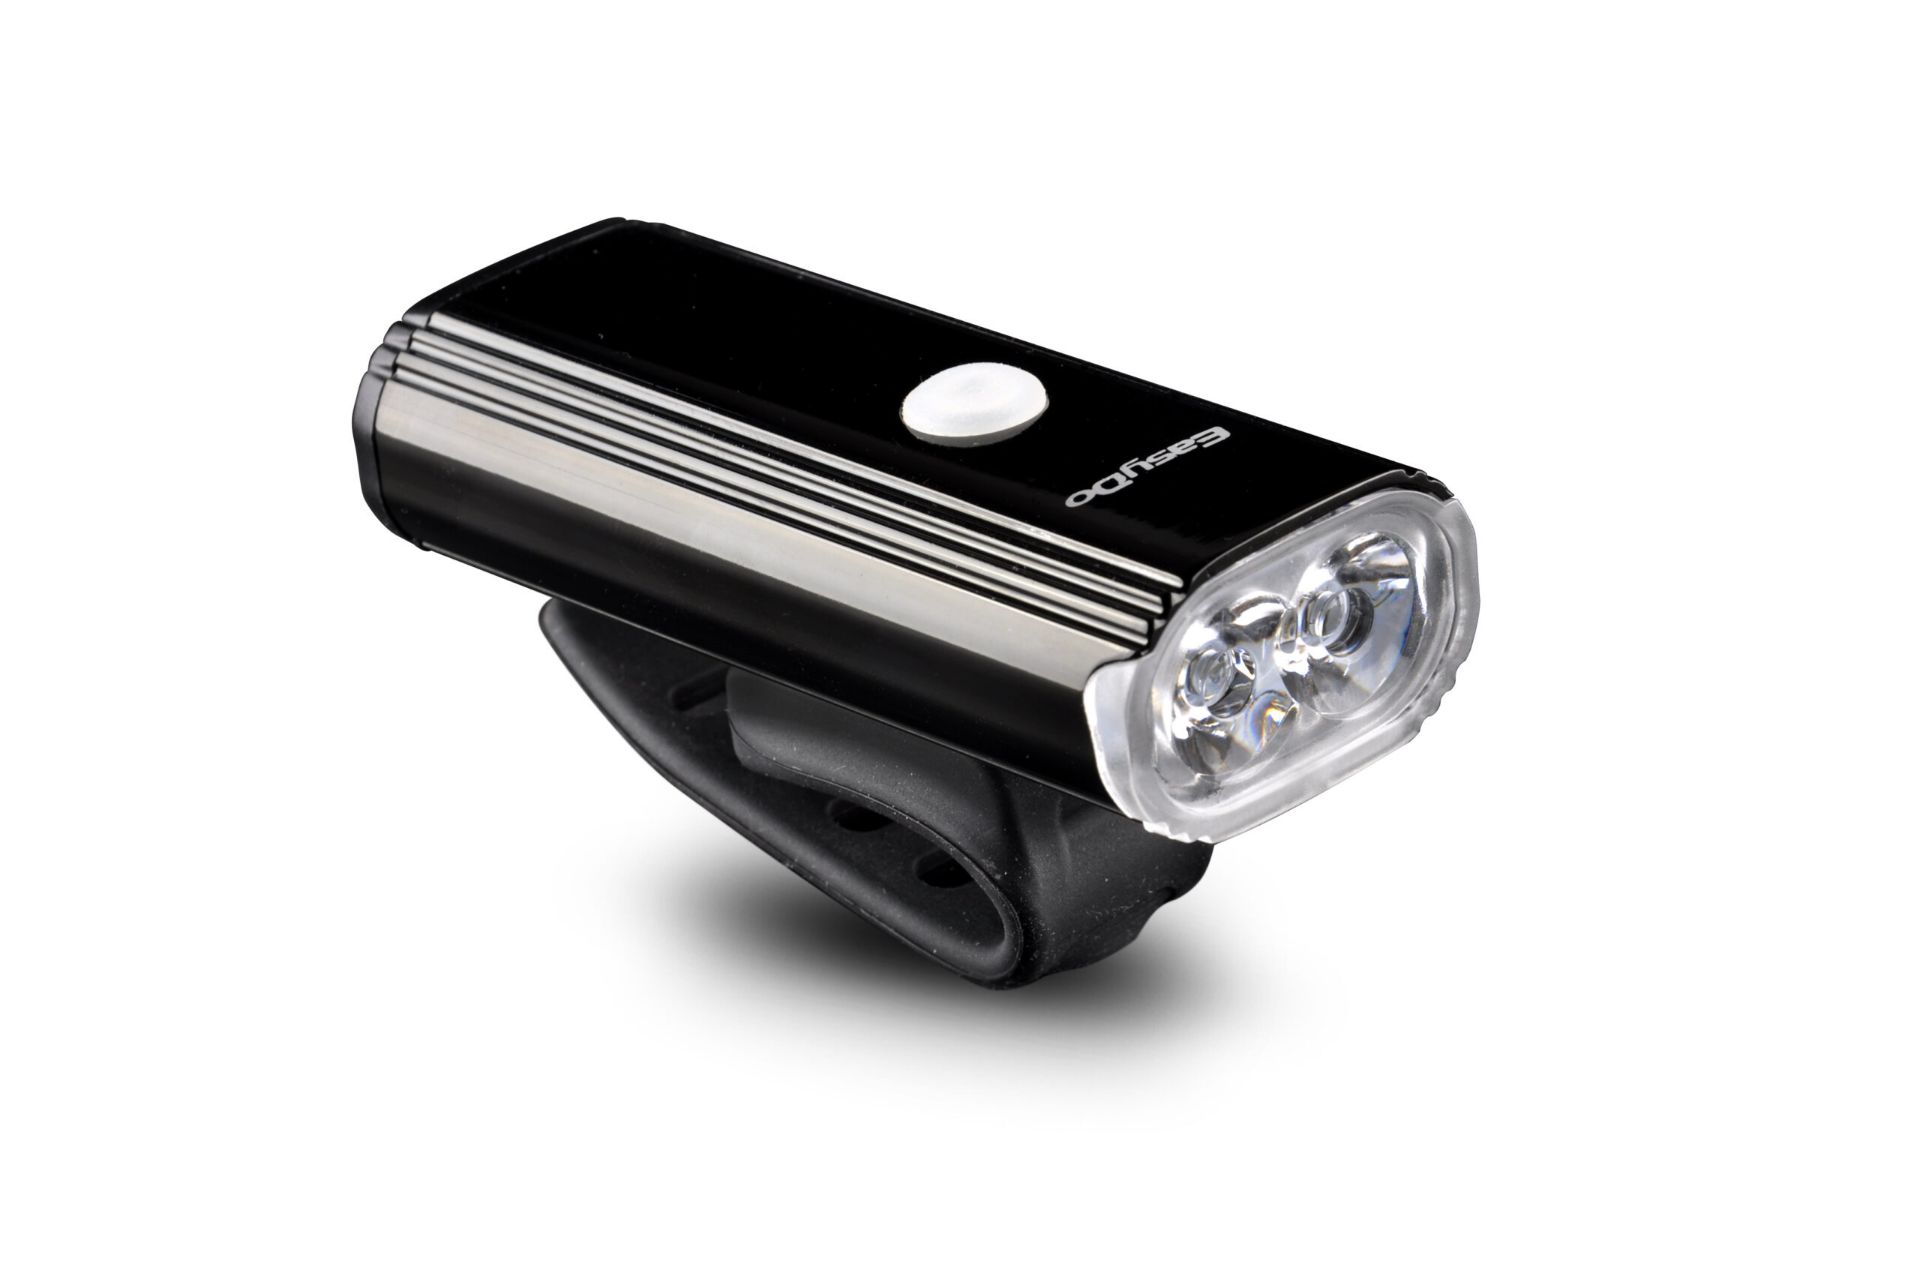 UNITS - RBSM SPORTS BIKE FRONT & REAR RECHARGEABLE LIGHT SETS (NEW IN BOX) (MSRP $70/SET)